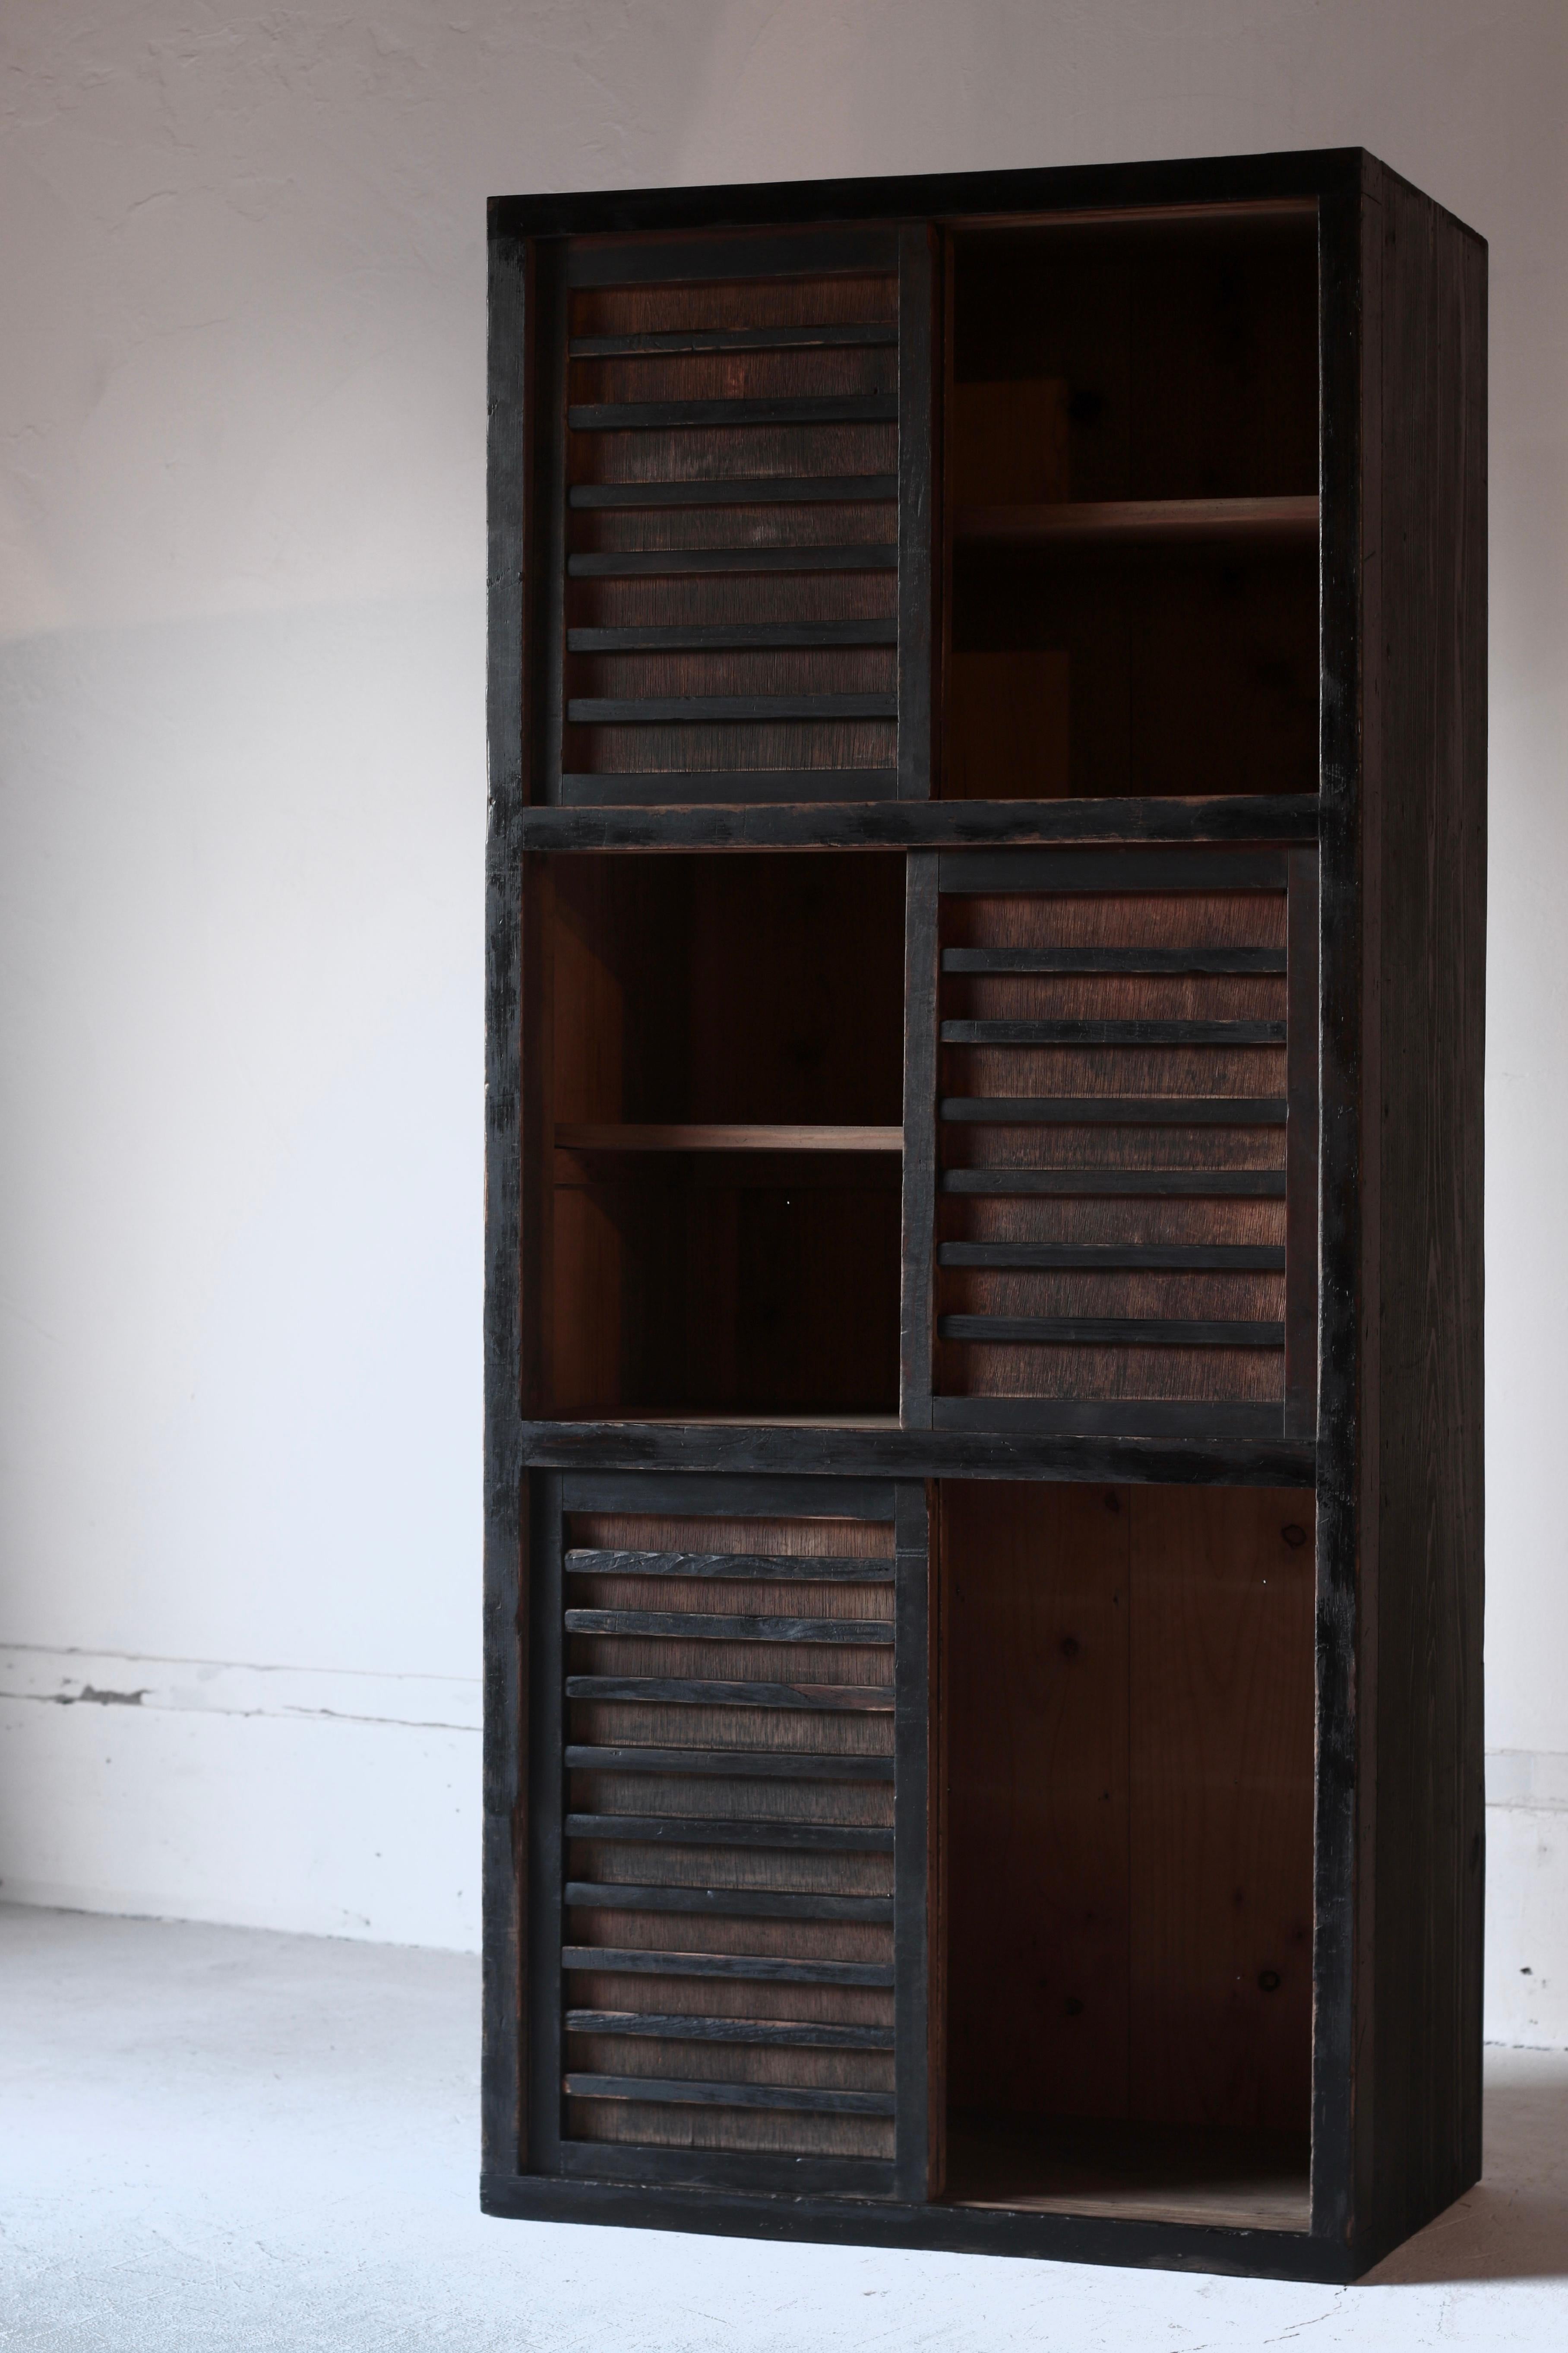 It is a cedar cabinet that was used in an old private house in Japan.

It is dyed black using 